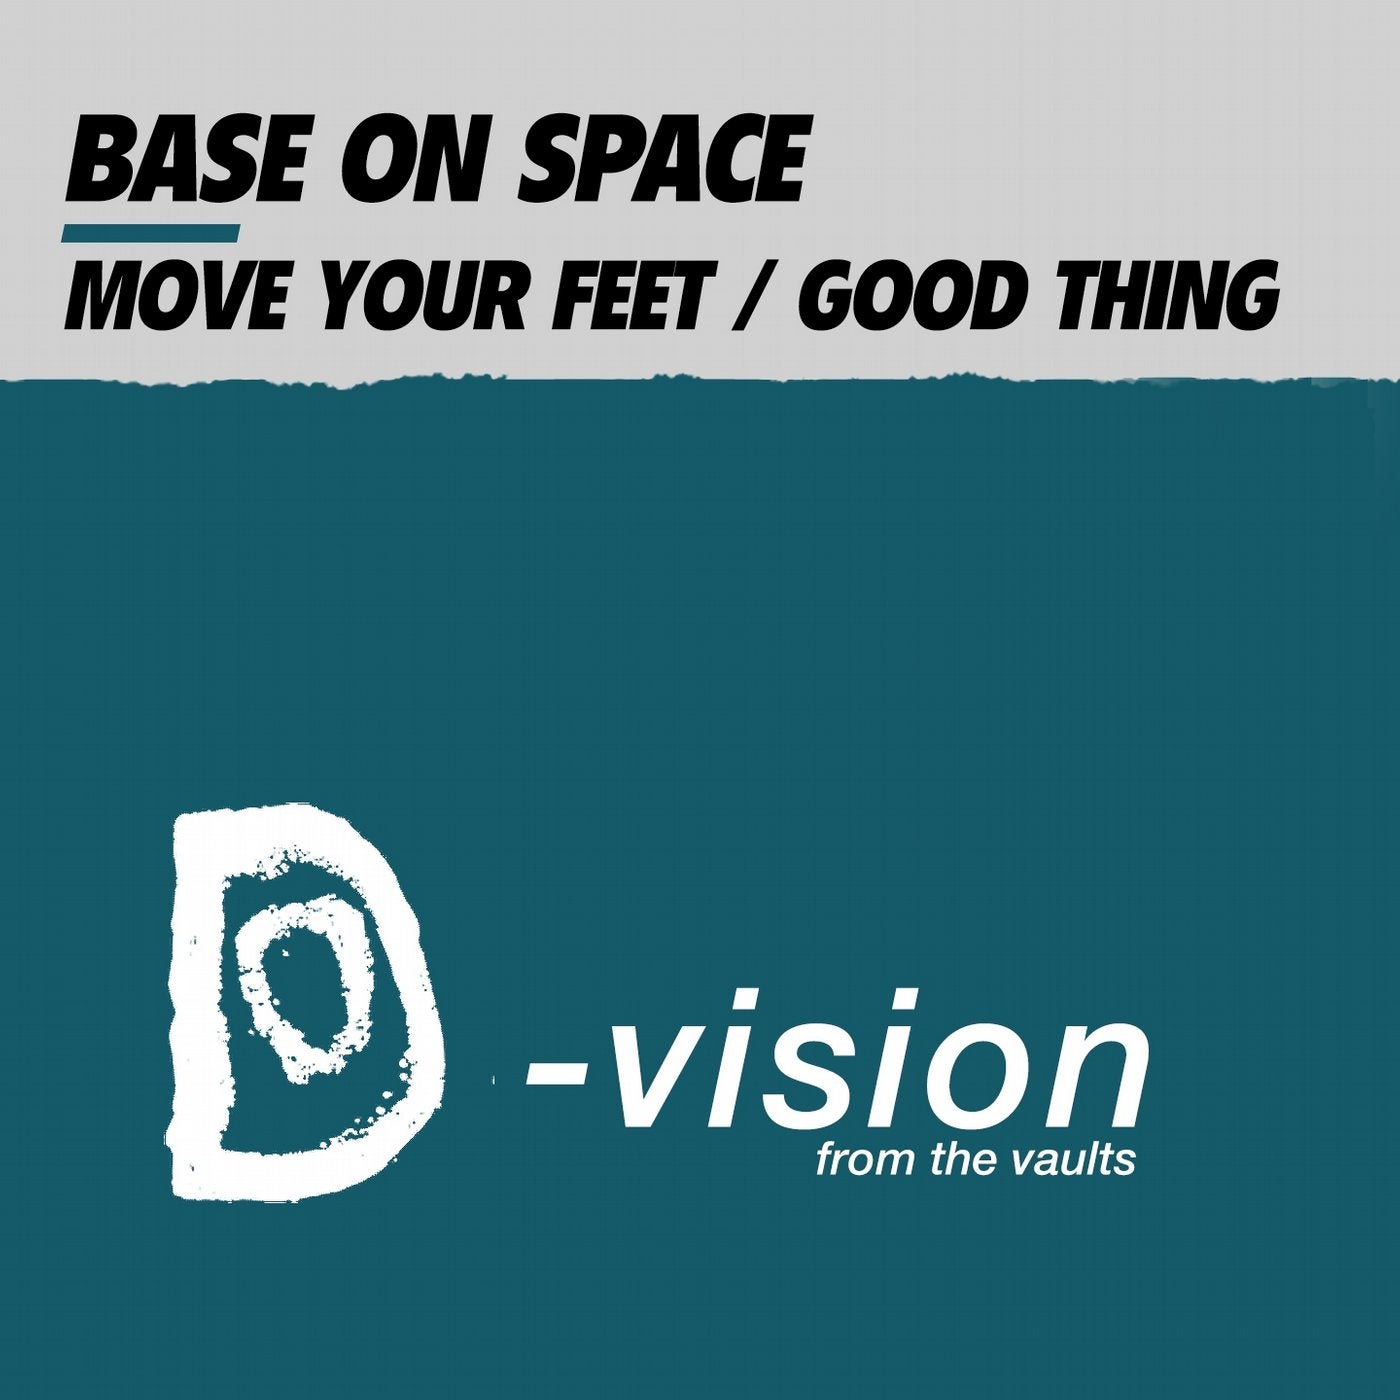 Move Your Feet / Good Thing